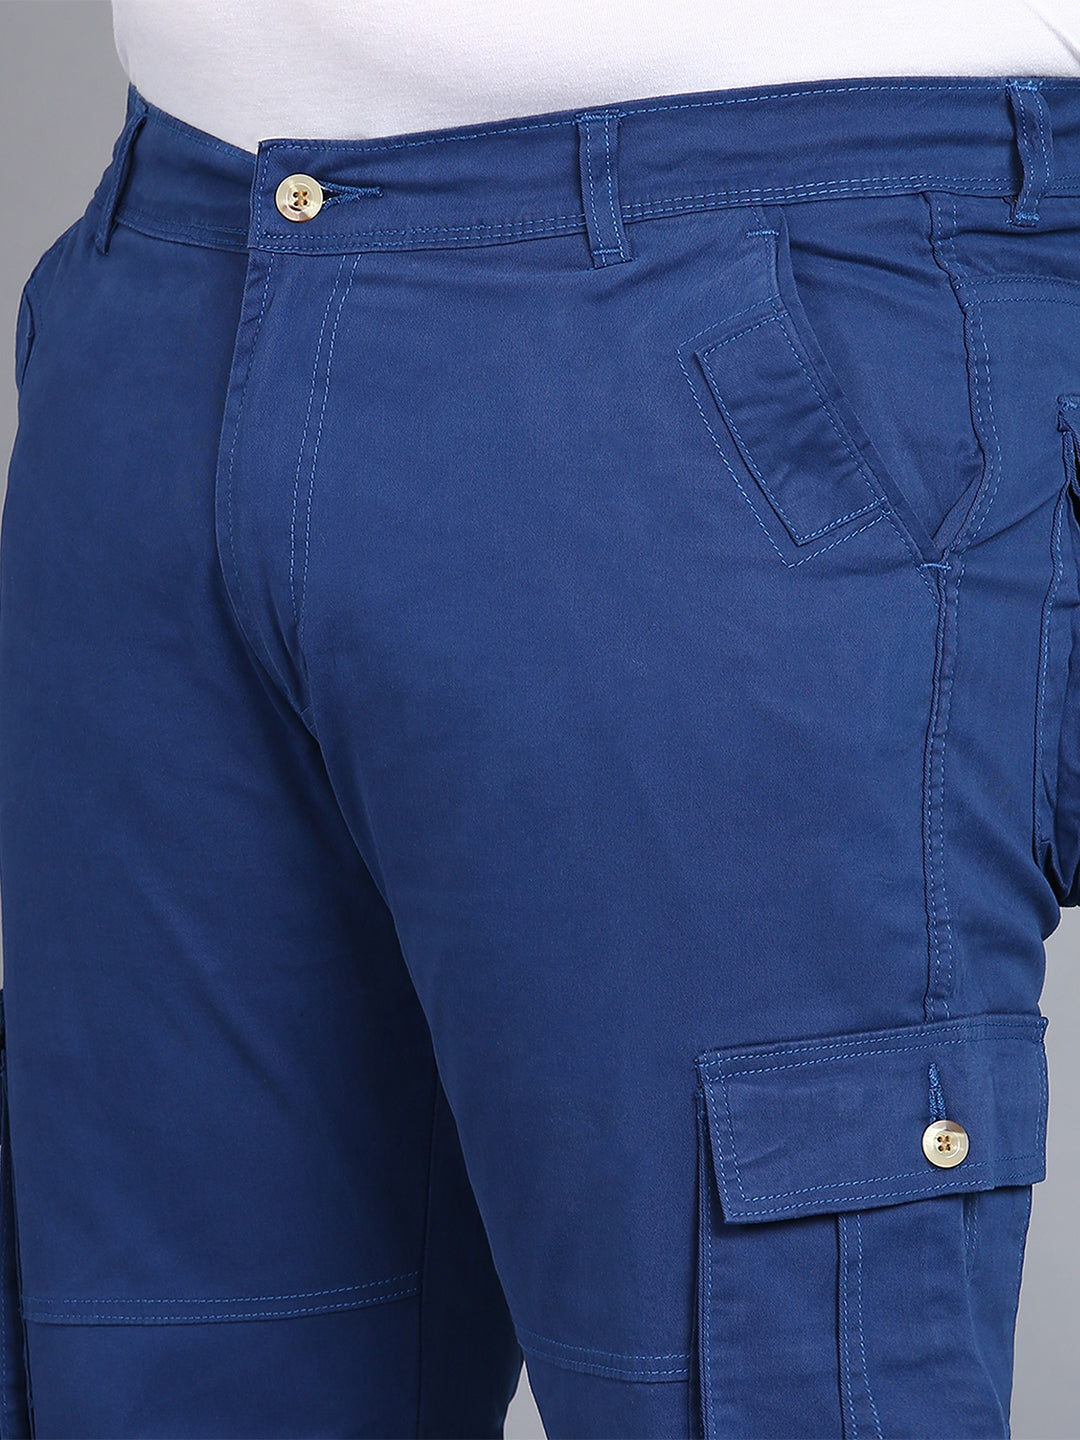 Plus Men's Royal Blue Regular Fit Solid Cargo Chino Pant with 6 Pockets